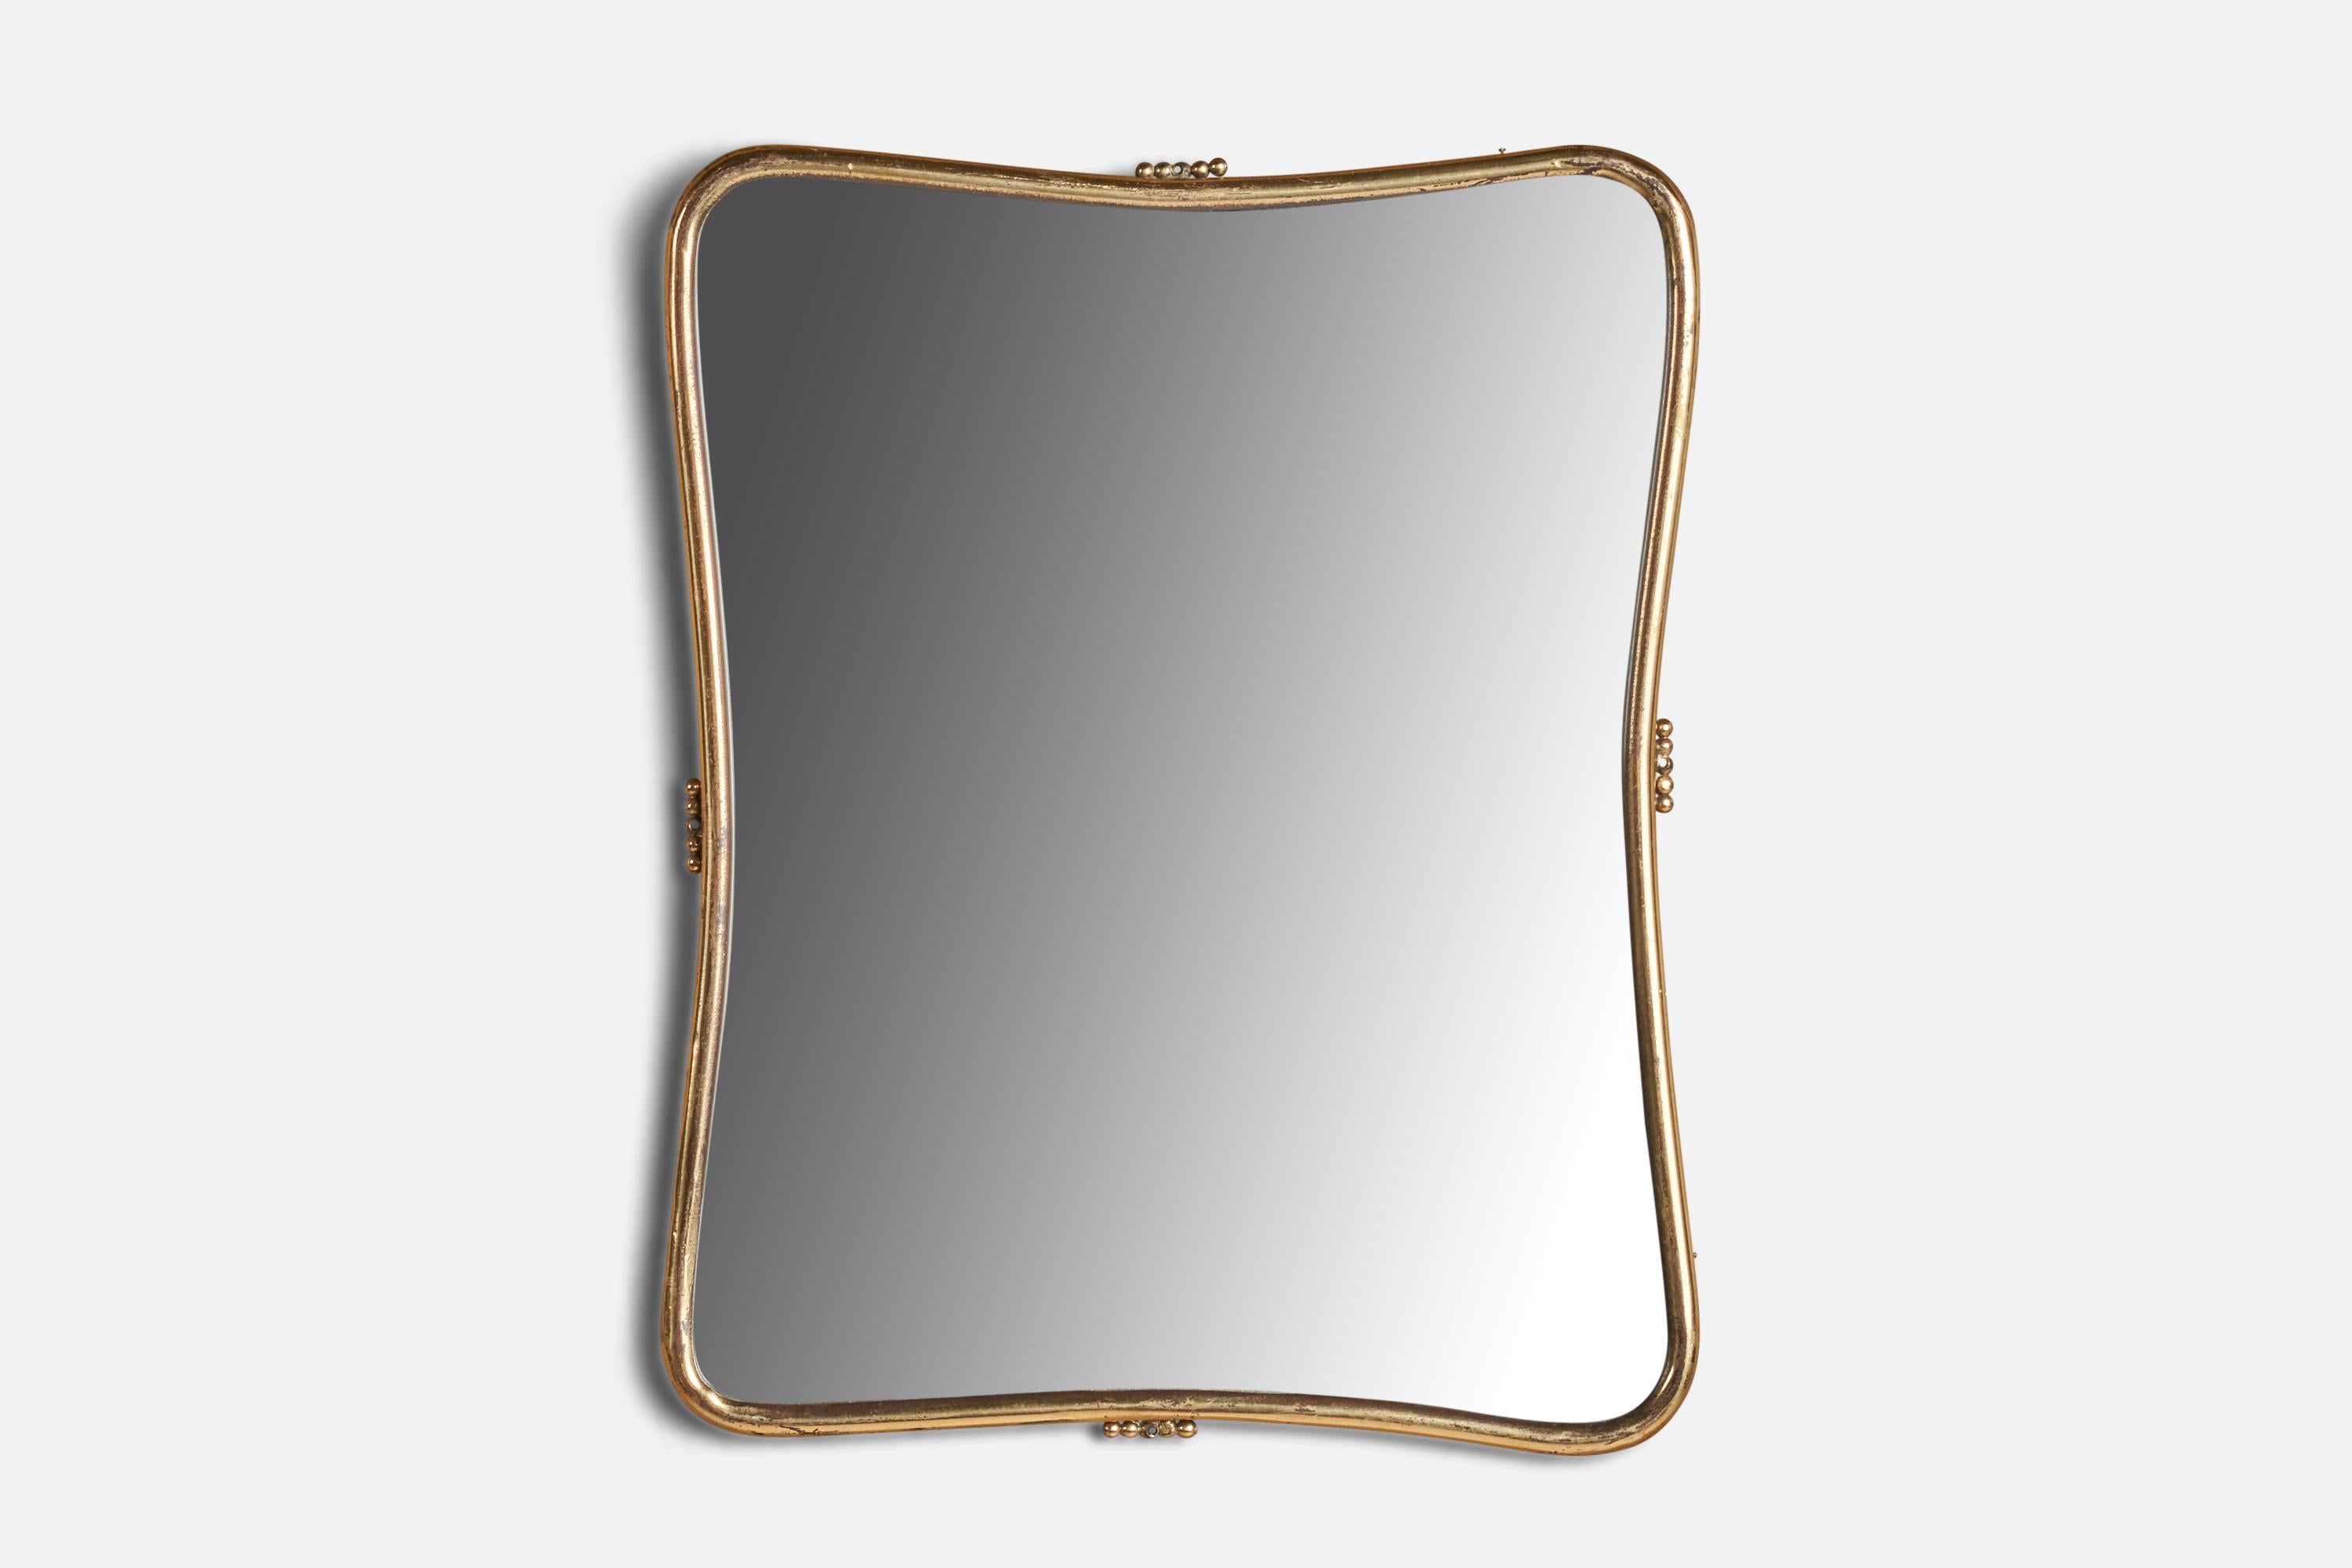 A brass wall mirror designed and produced in Italy, 1940s.